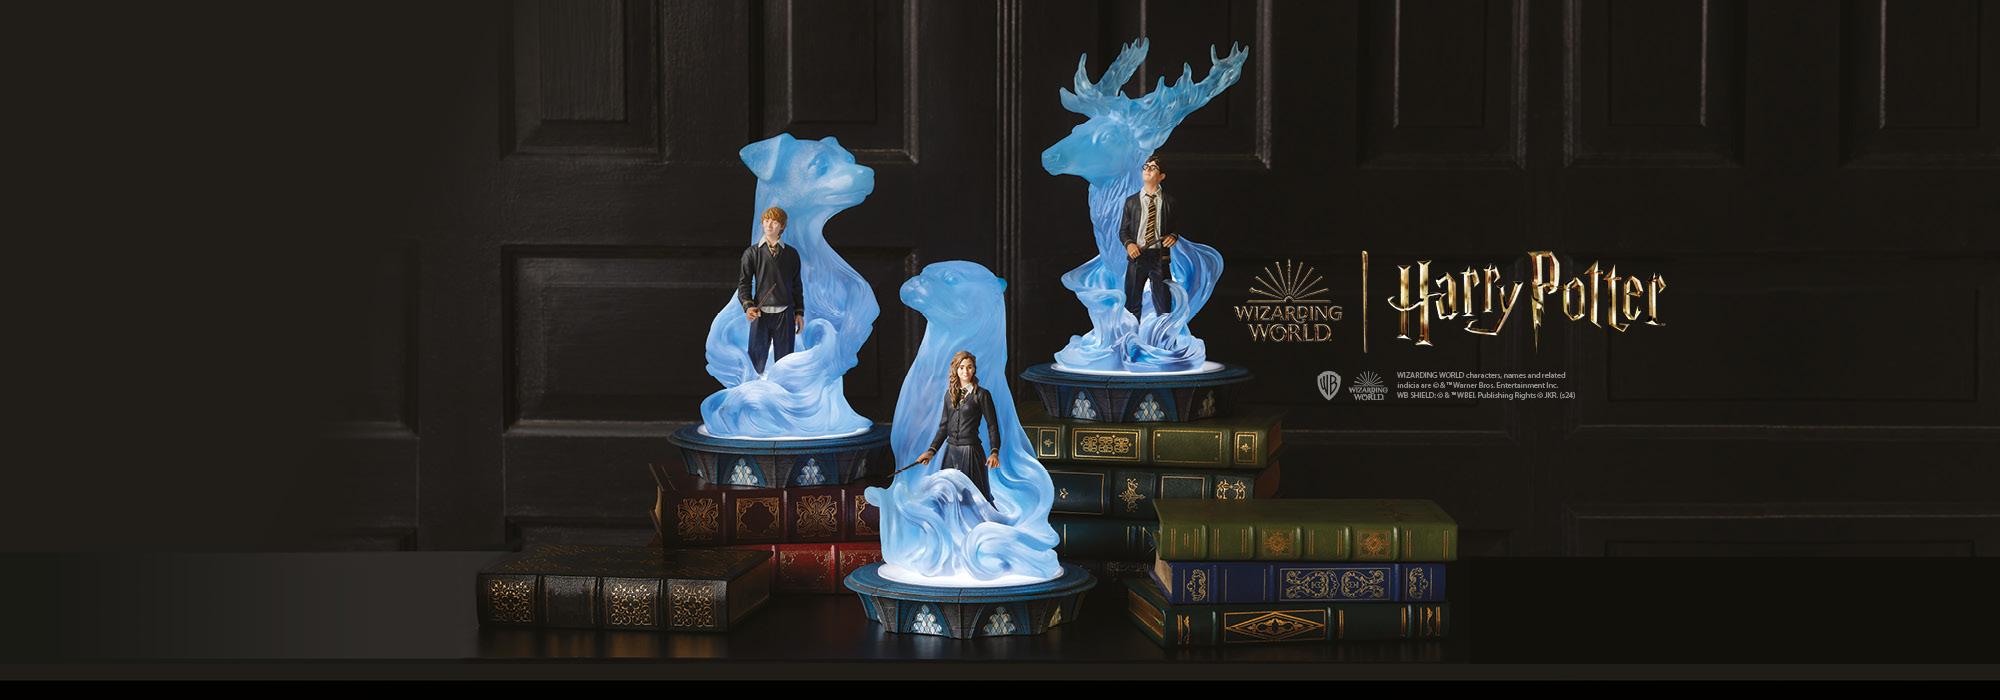 Wizarding World of Harry Potter collection | Enesco Gift Shop